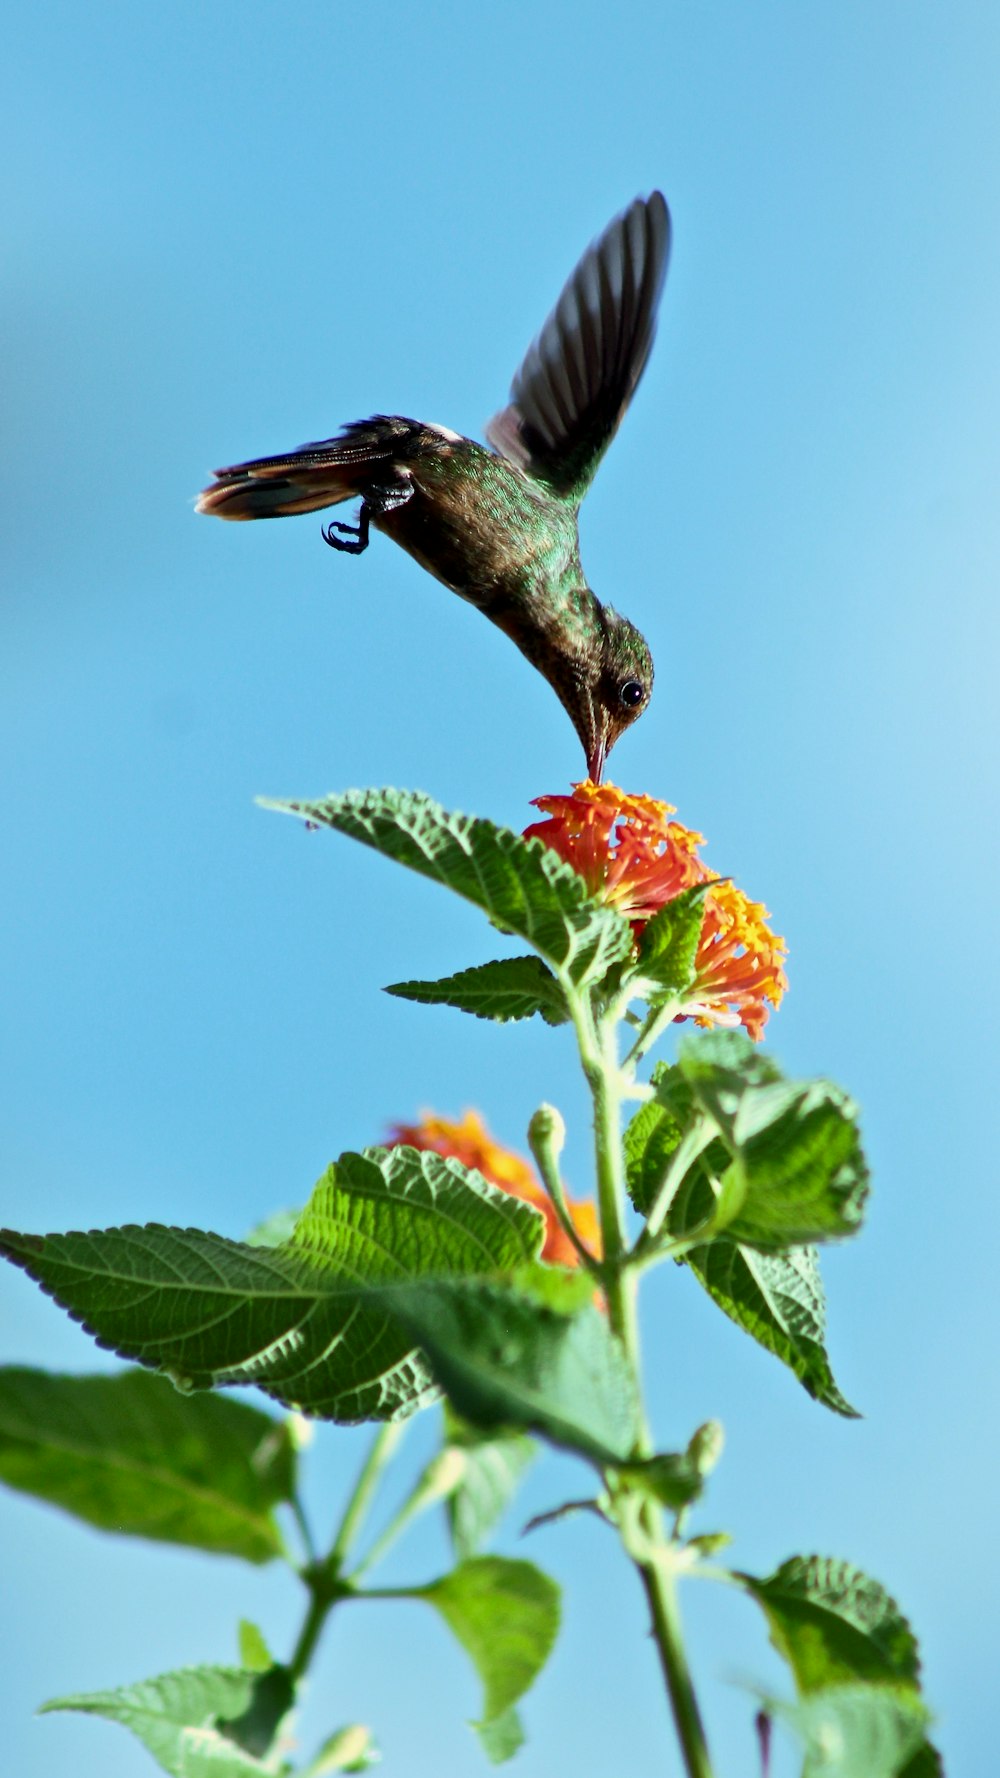 bird flying and biting petaled flower during daytime